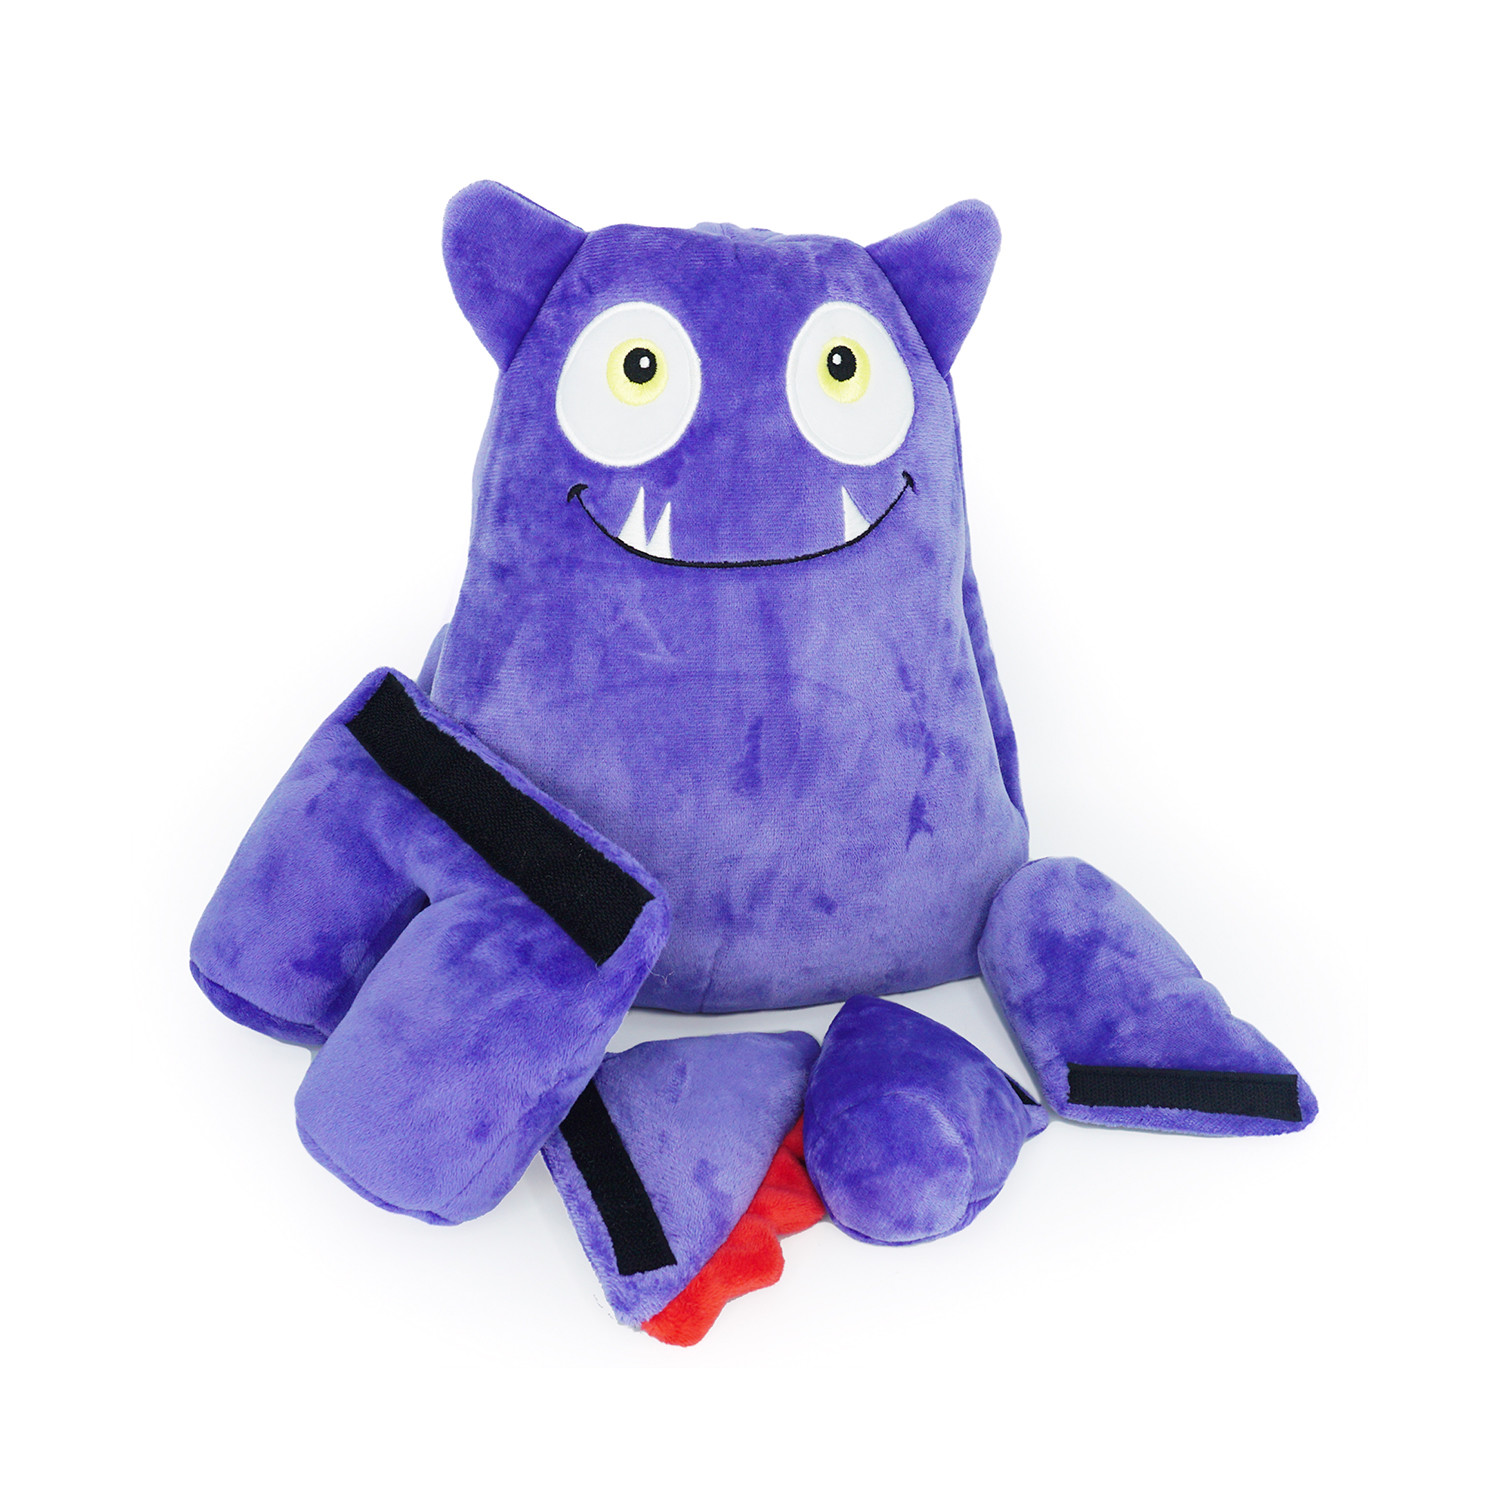 Tearribles - Tearable + Re-Attachable Dog Toys - Touch of Modern